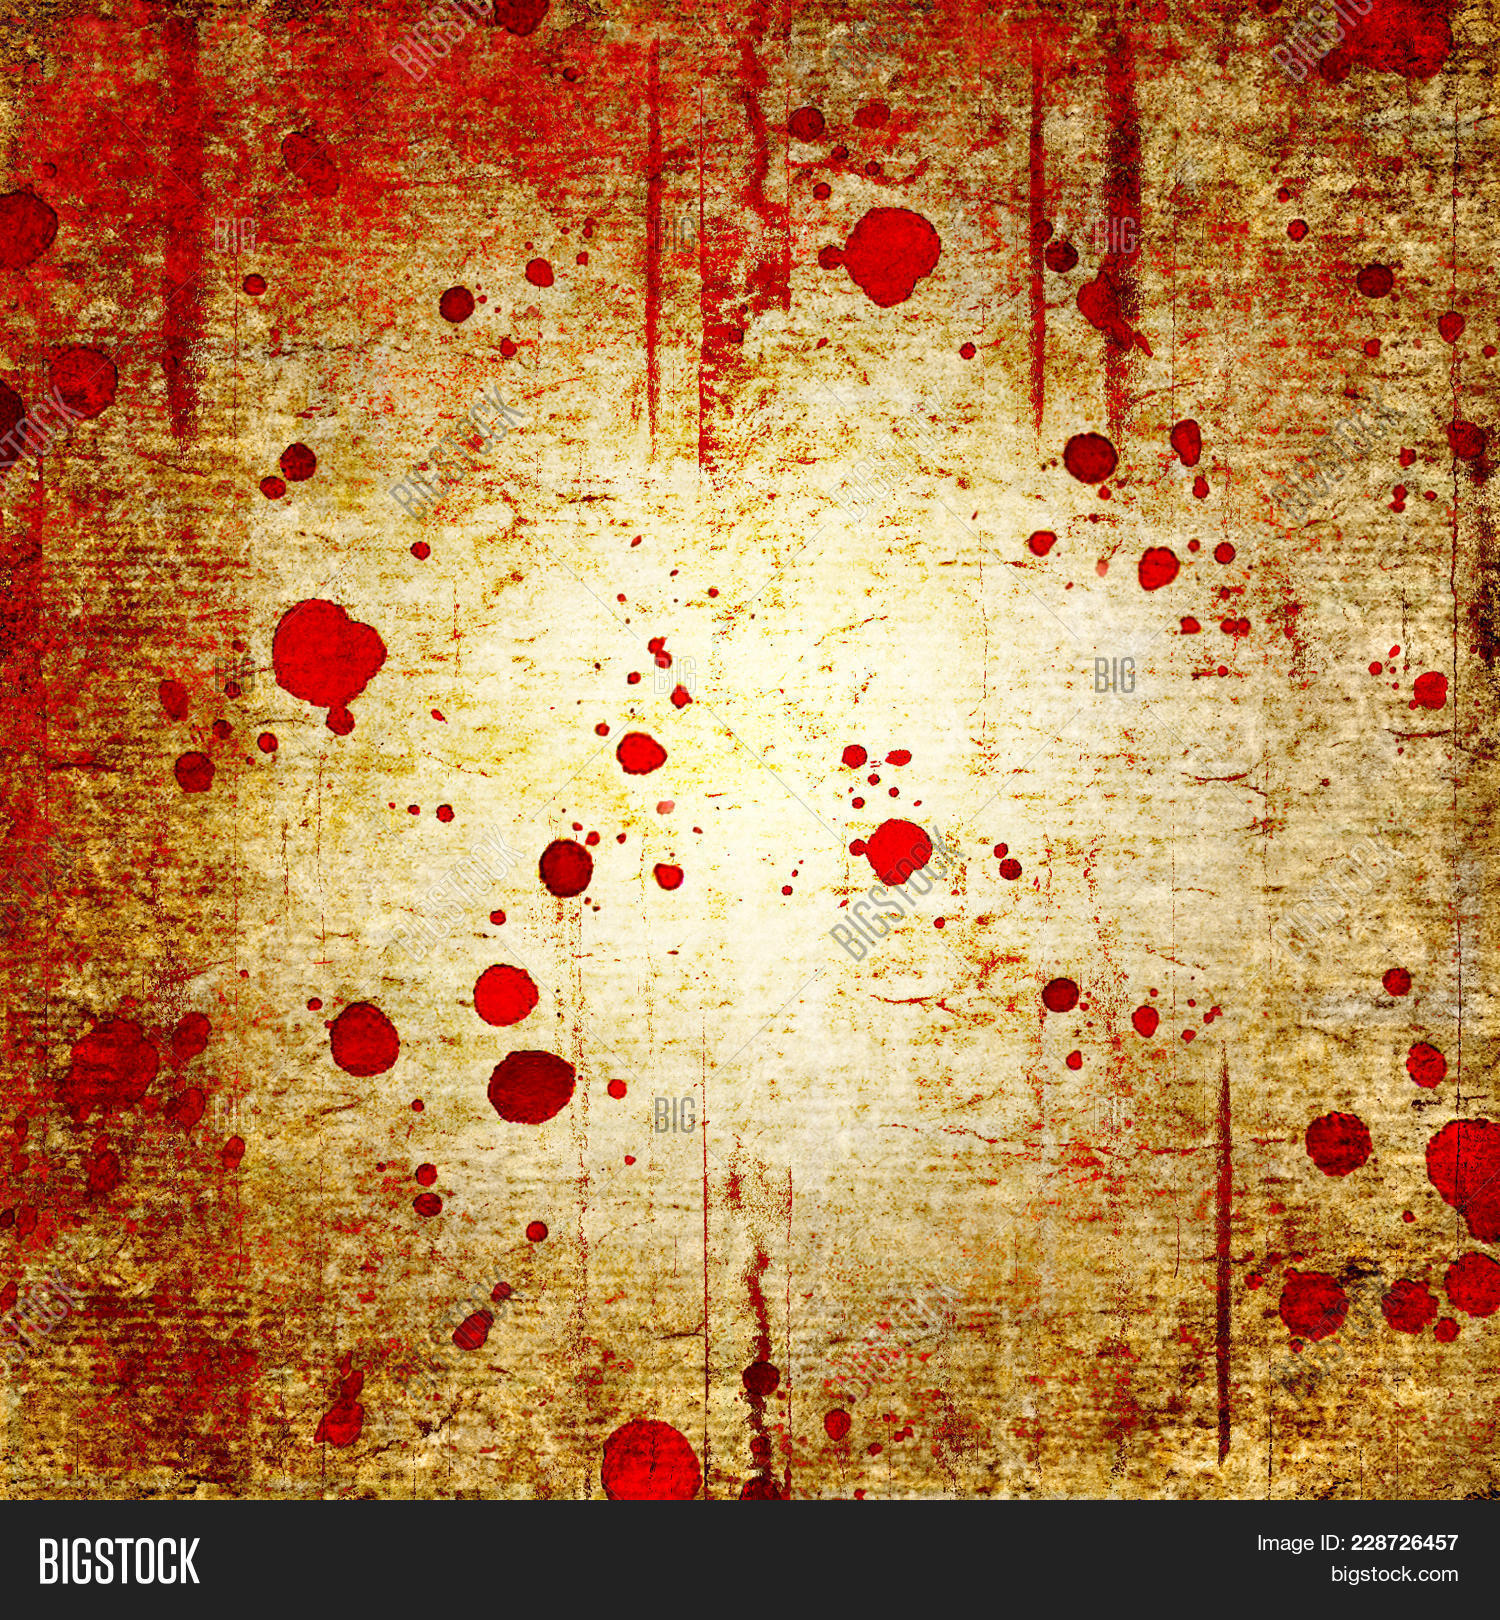 Bloody Blood Red Image & Photo (Free Trial) | Bigstock